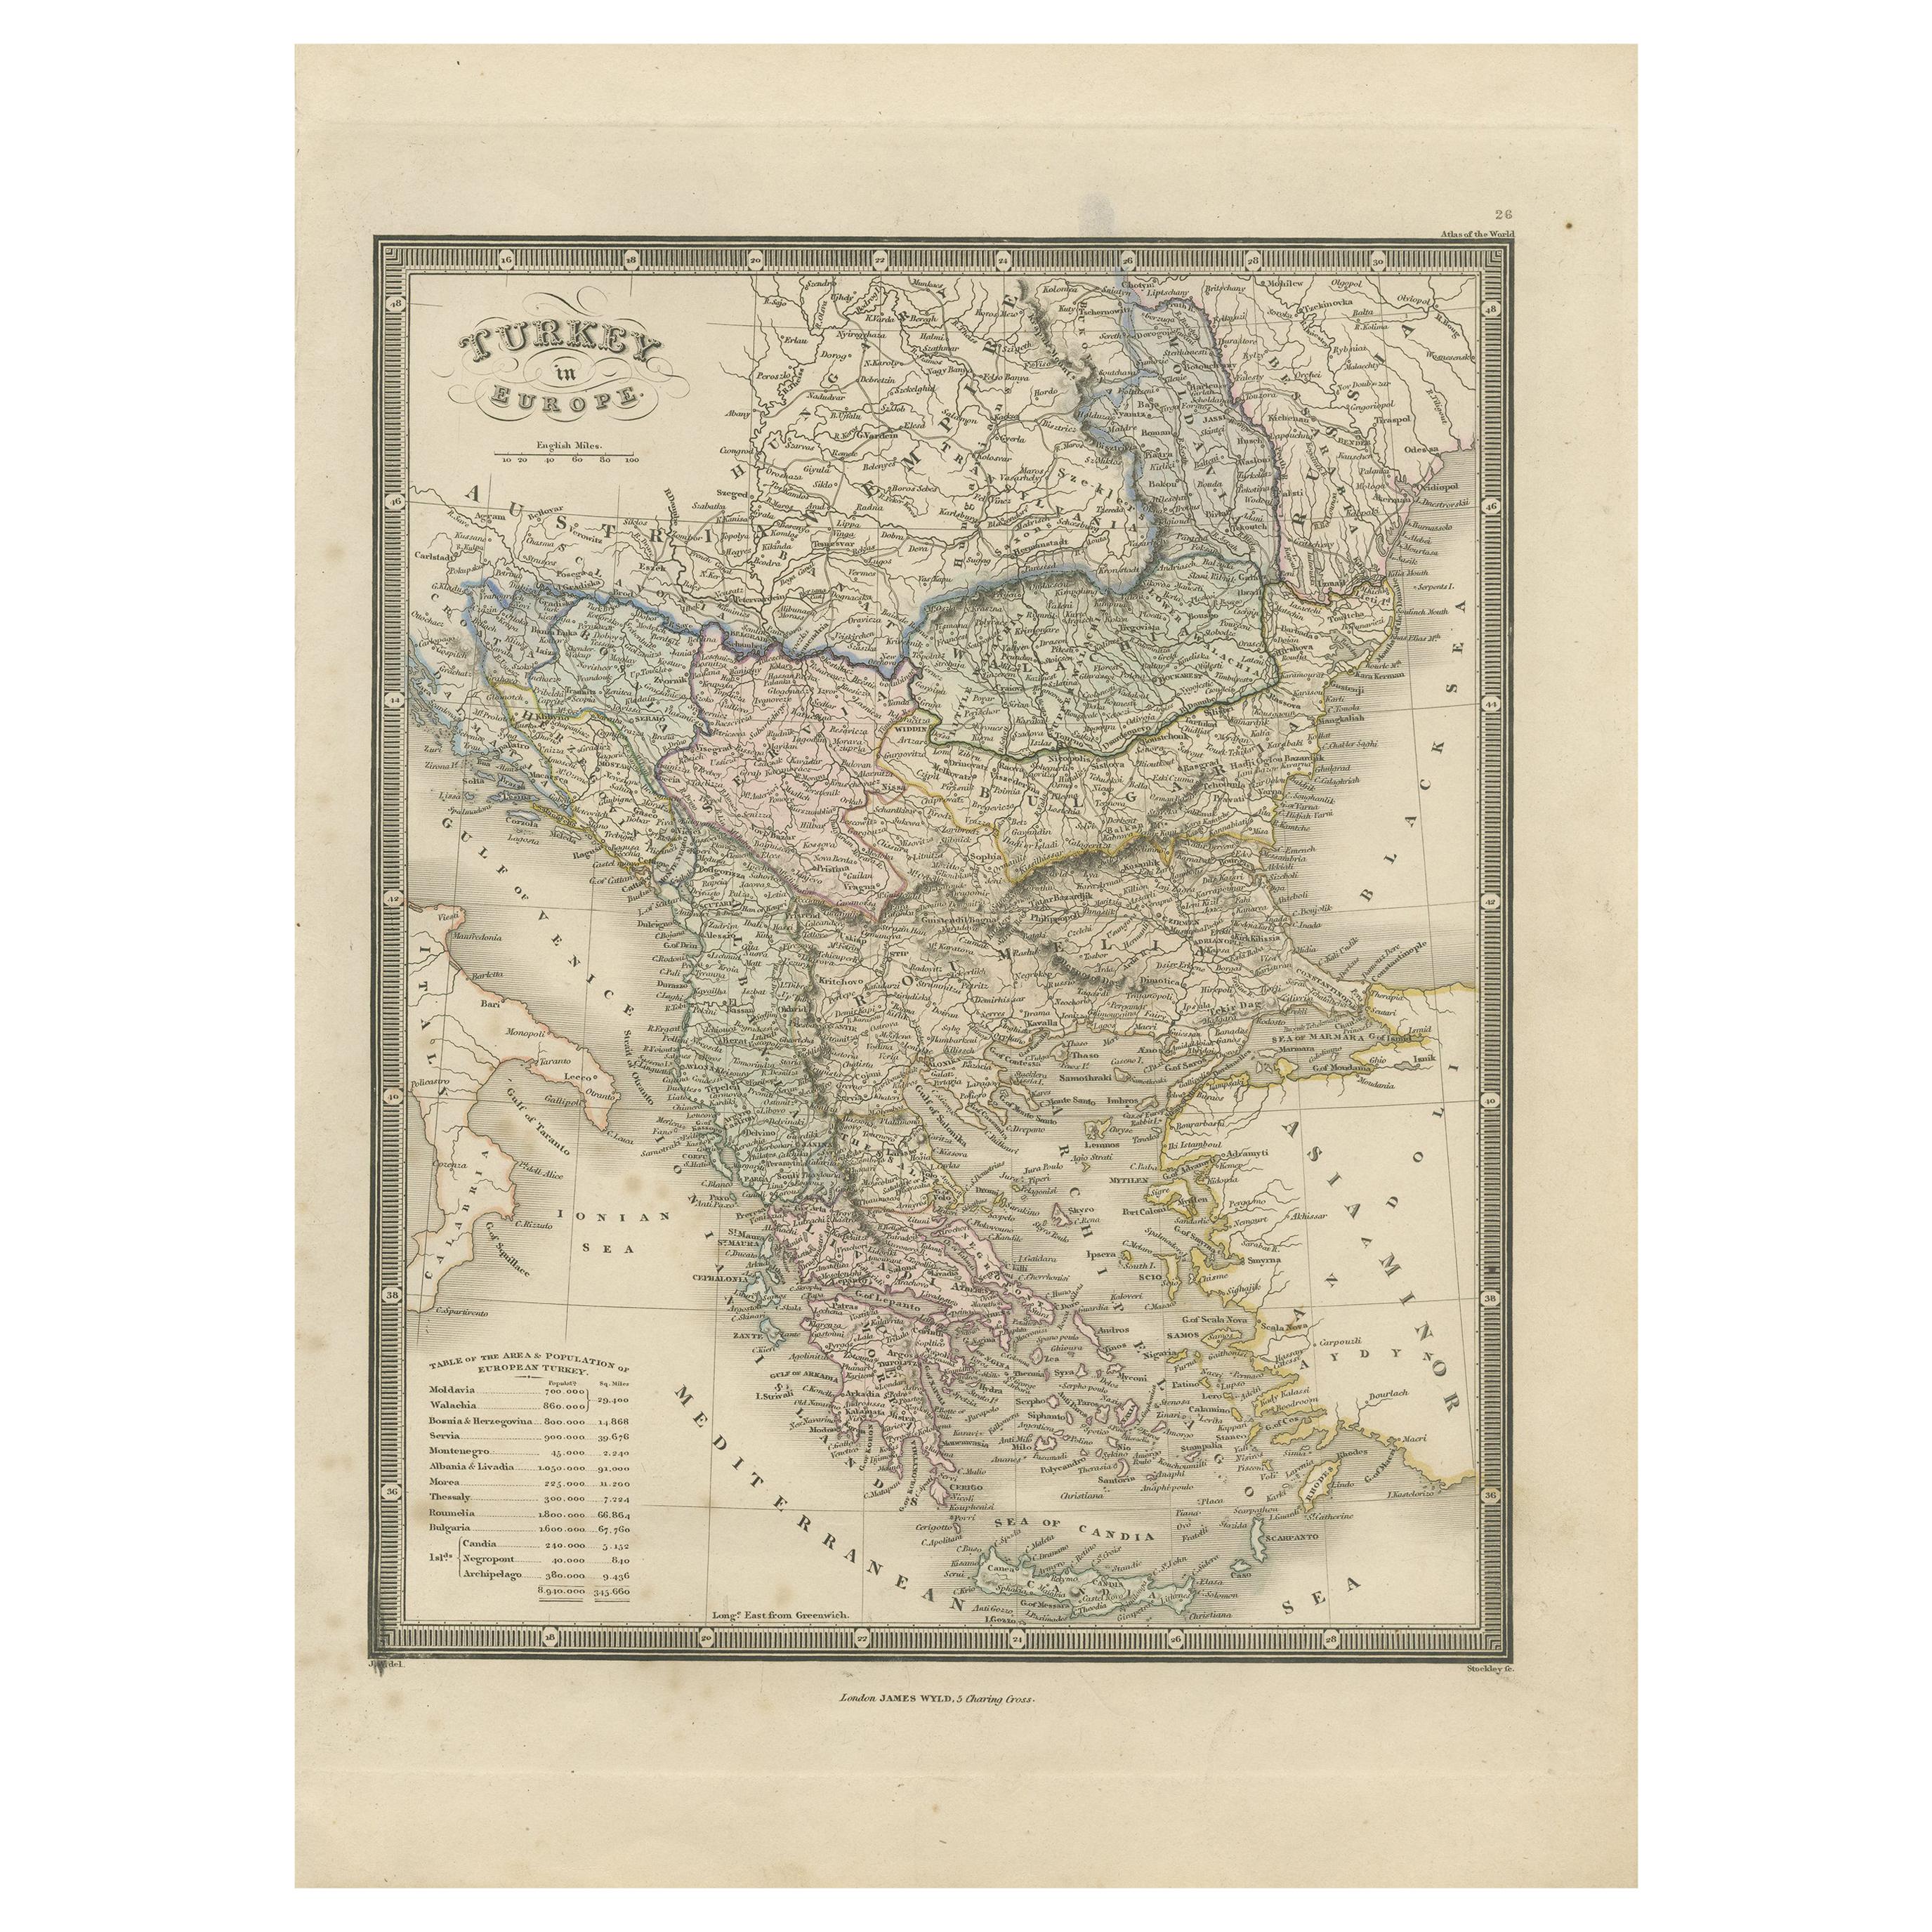 Antique Map of Turkey in Europe by Wyld, '1845'